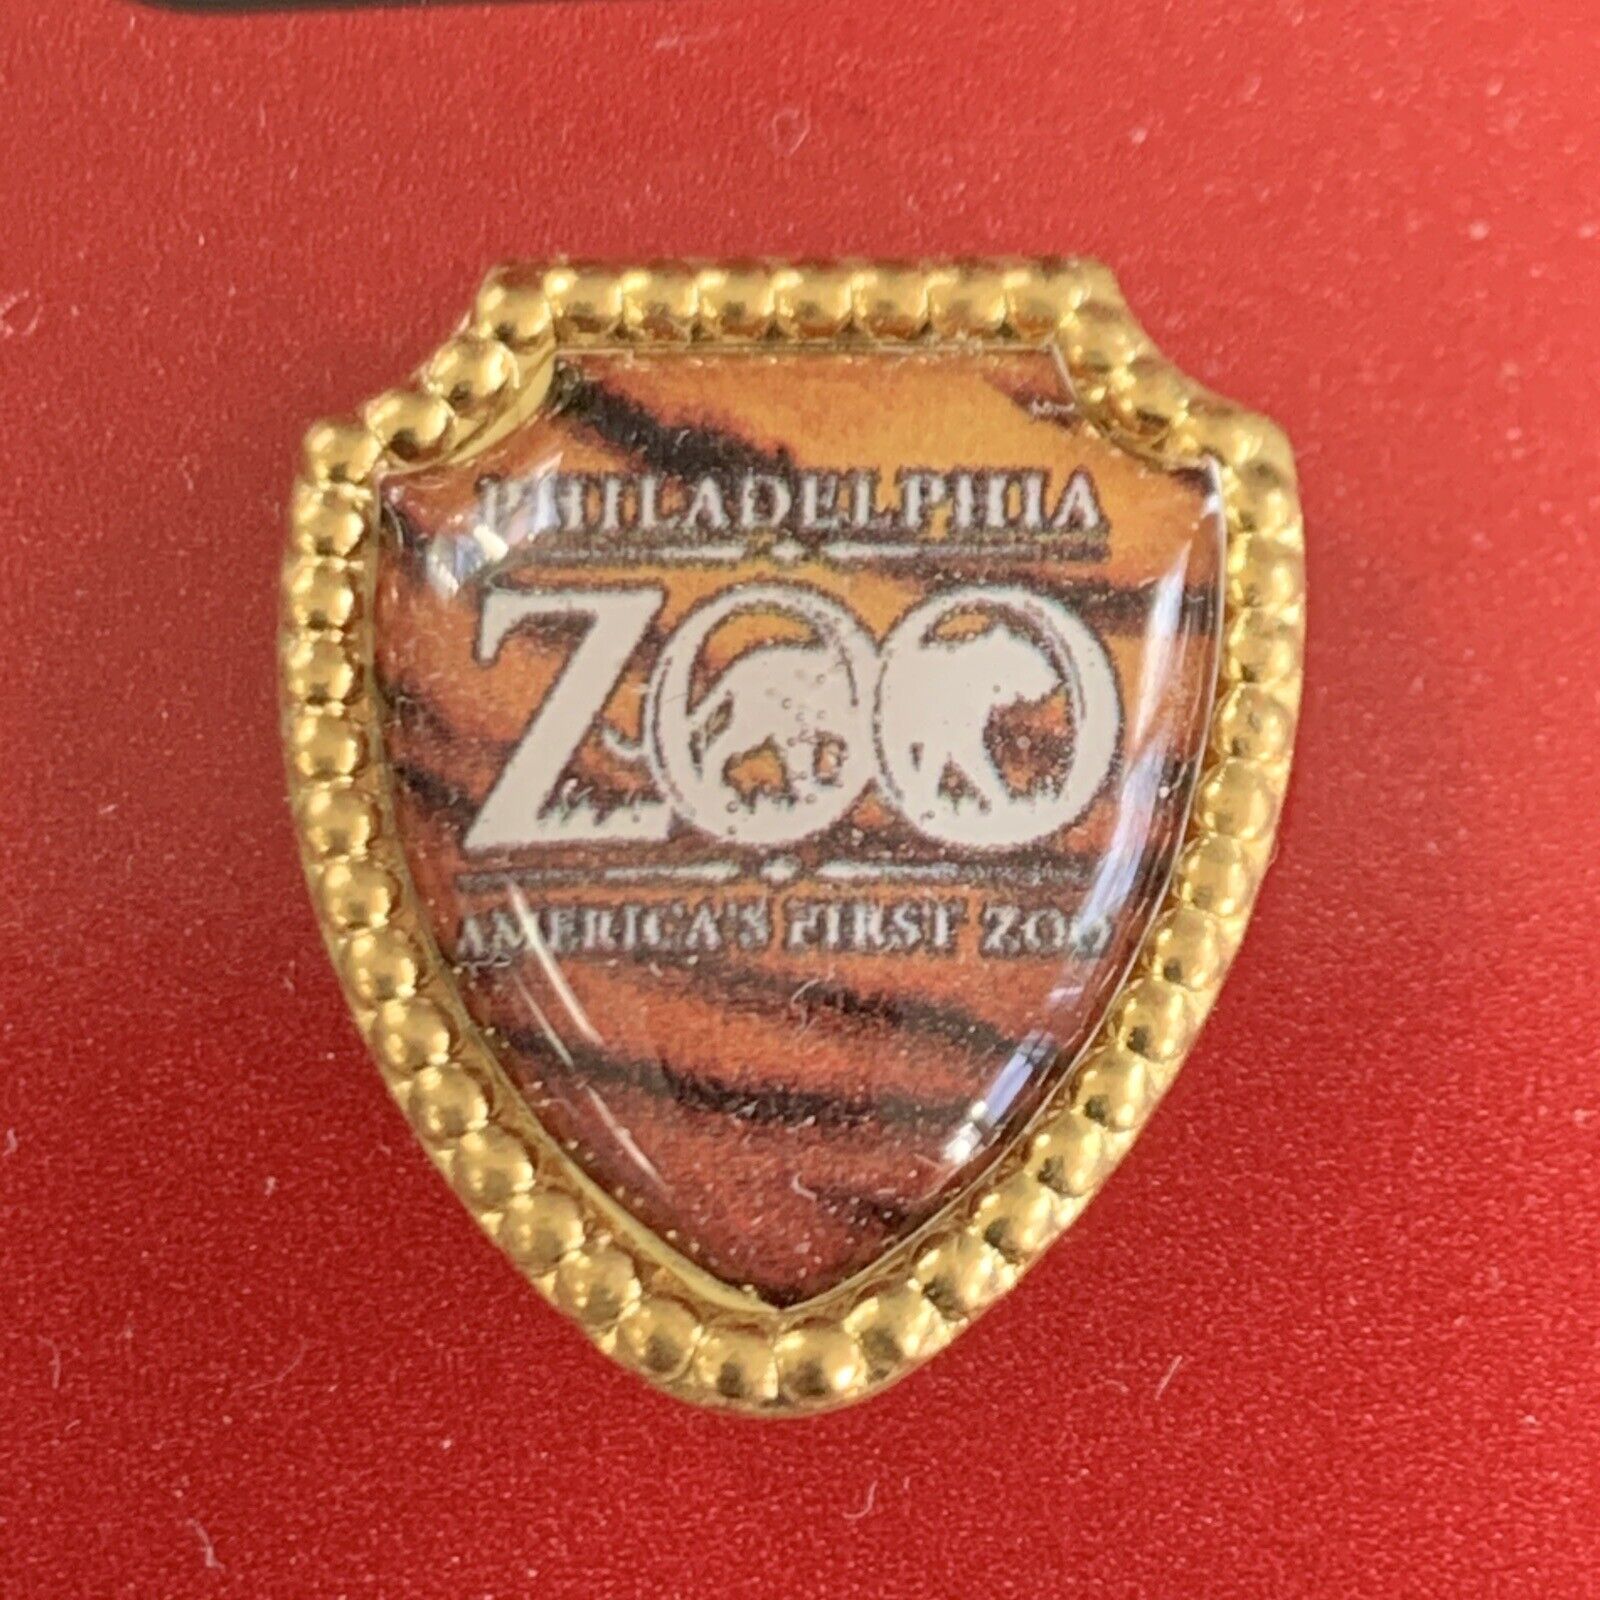 Vintage Philadelphia Zoo Lapel Pin Tiger Pattern America’s First Zoo NOS Fort US